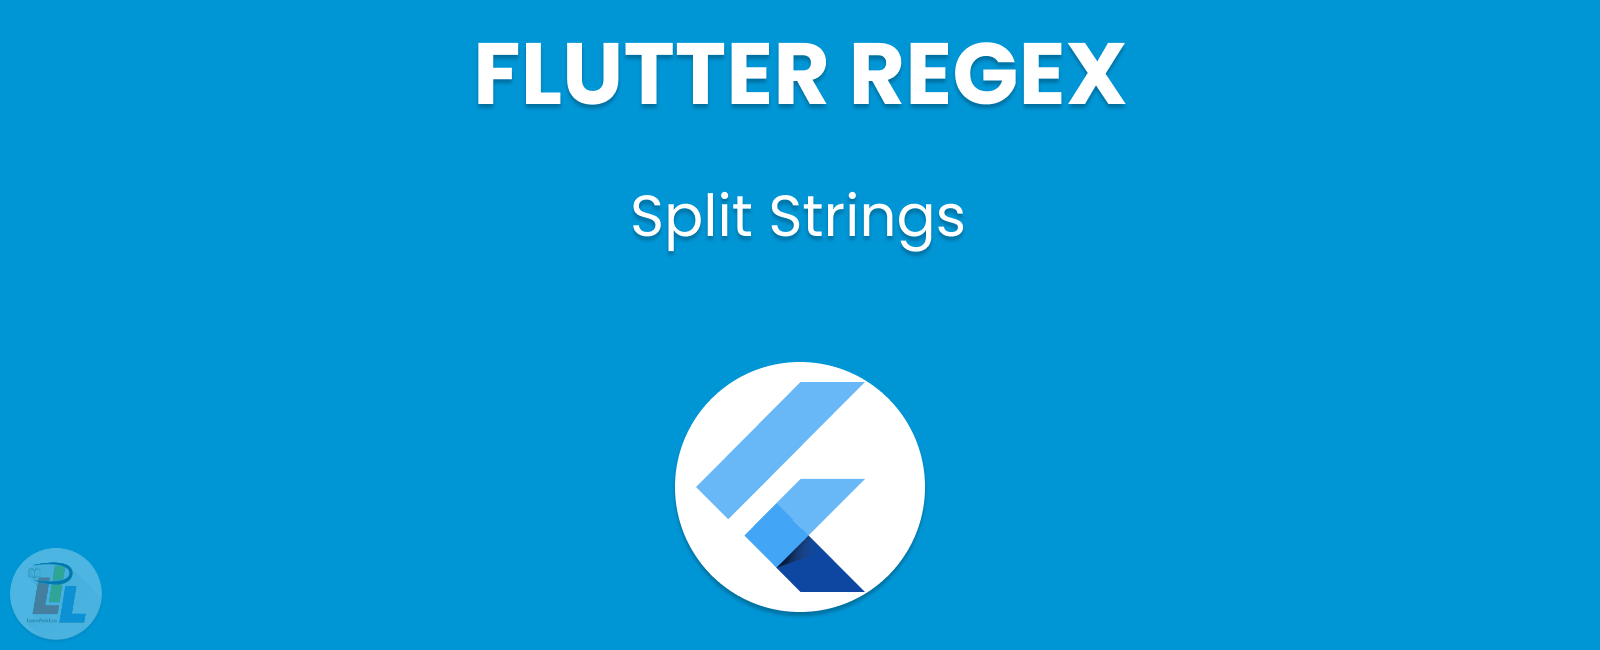 Splitting Strings with Regular Expressions in Flutter